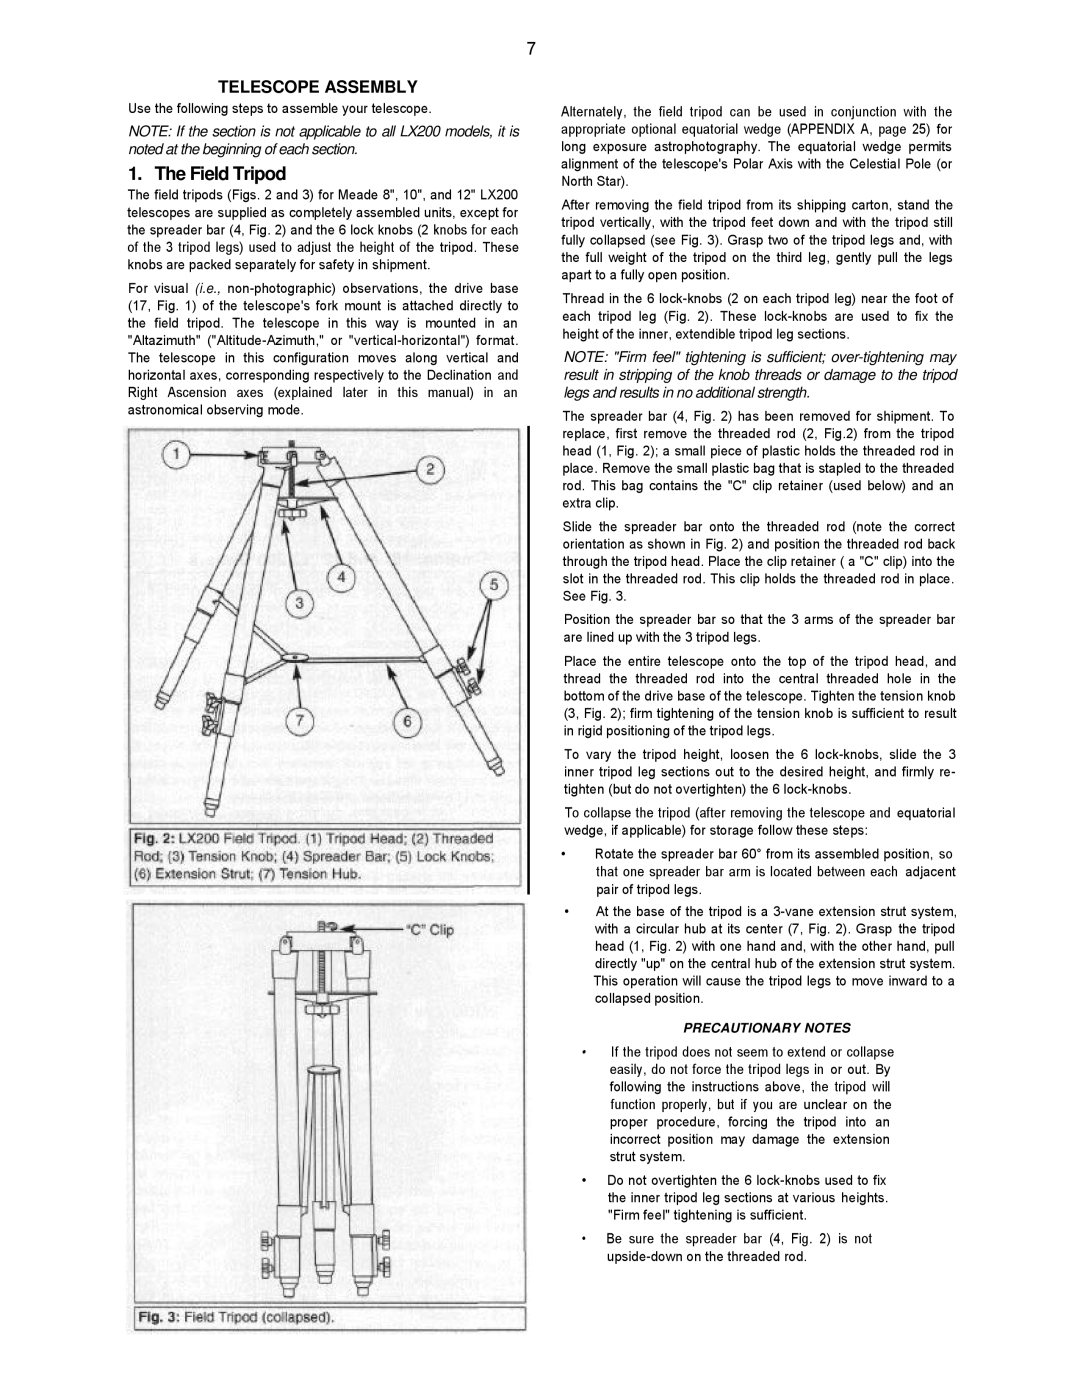 Leisure Time LX20 instruction manual The Field Tripod, Telescope Assembly 